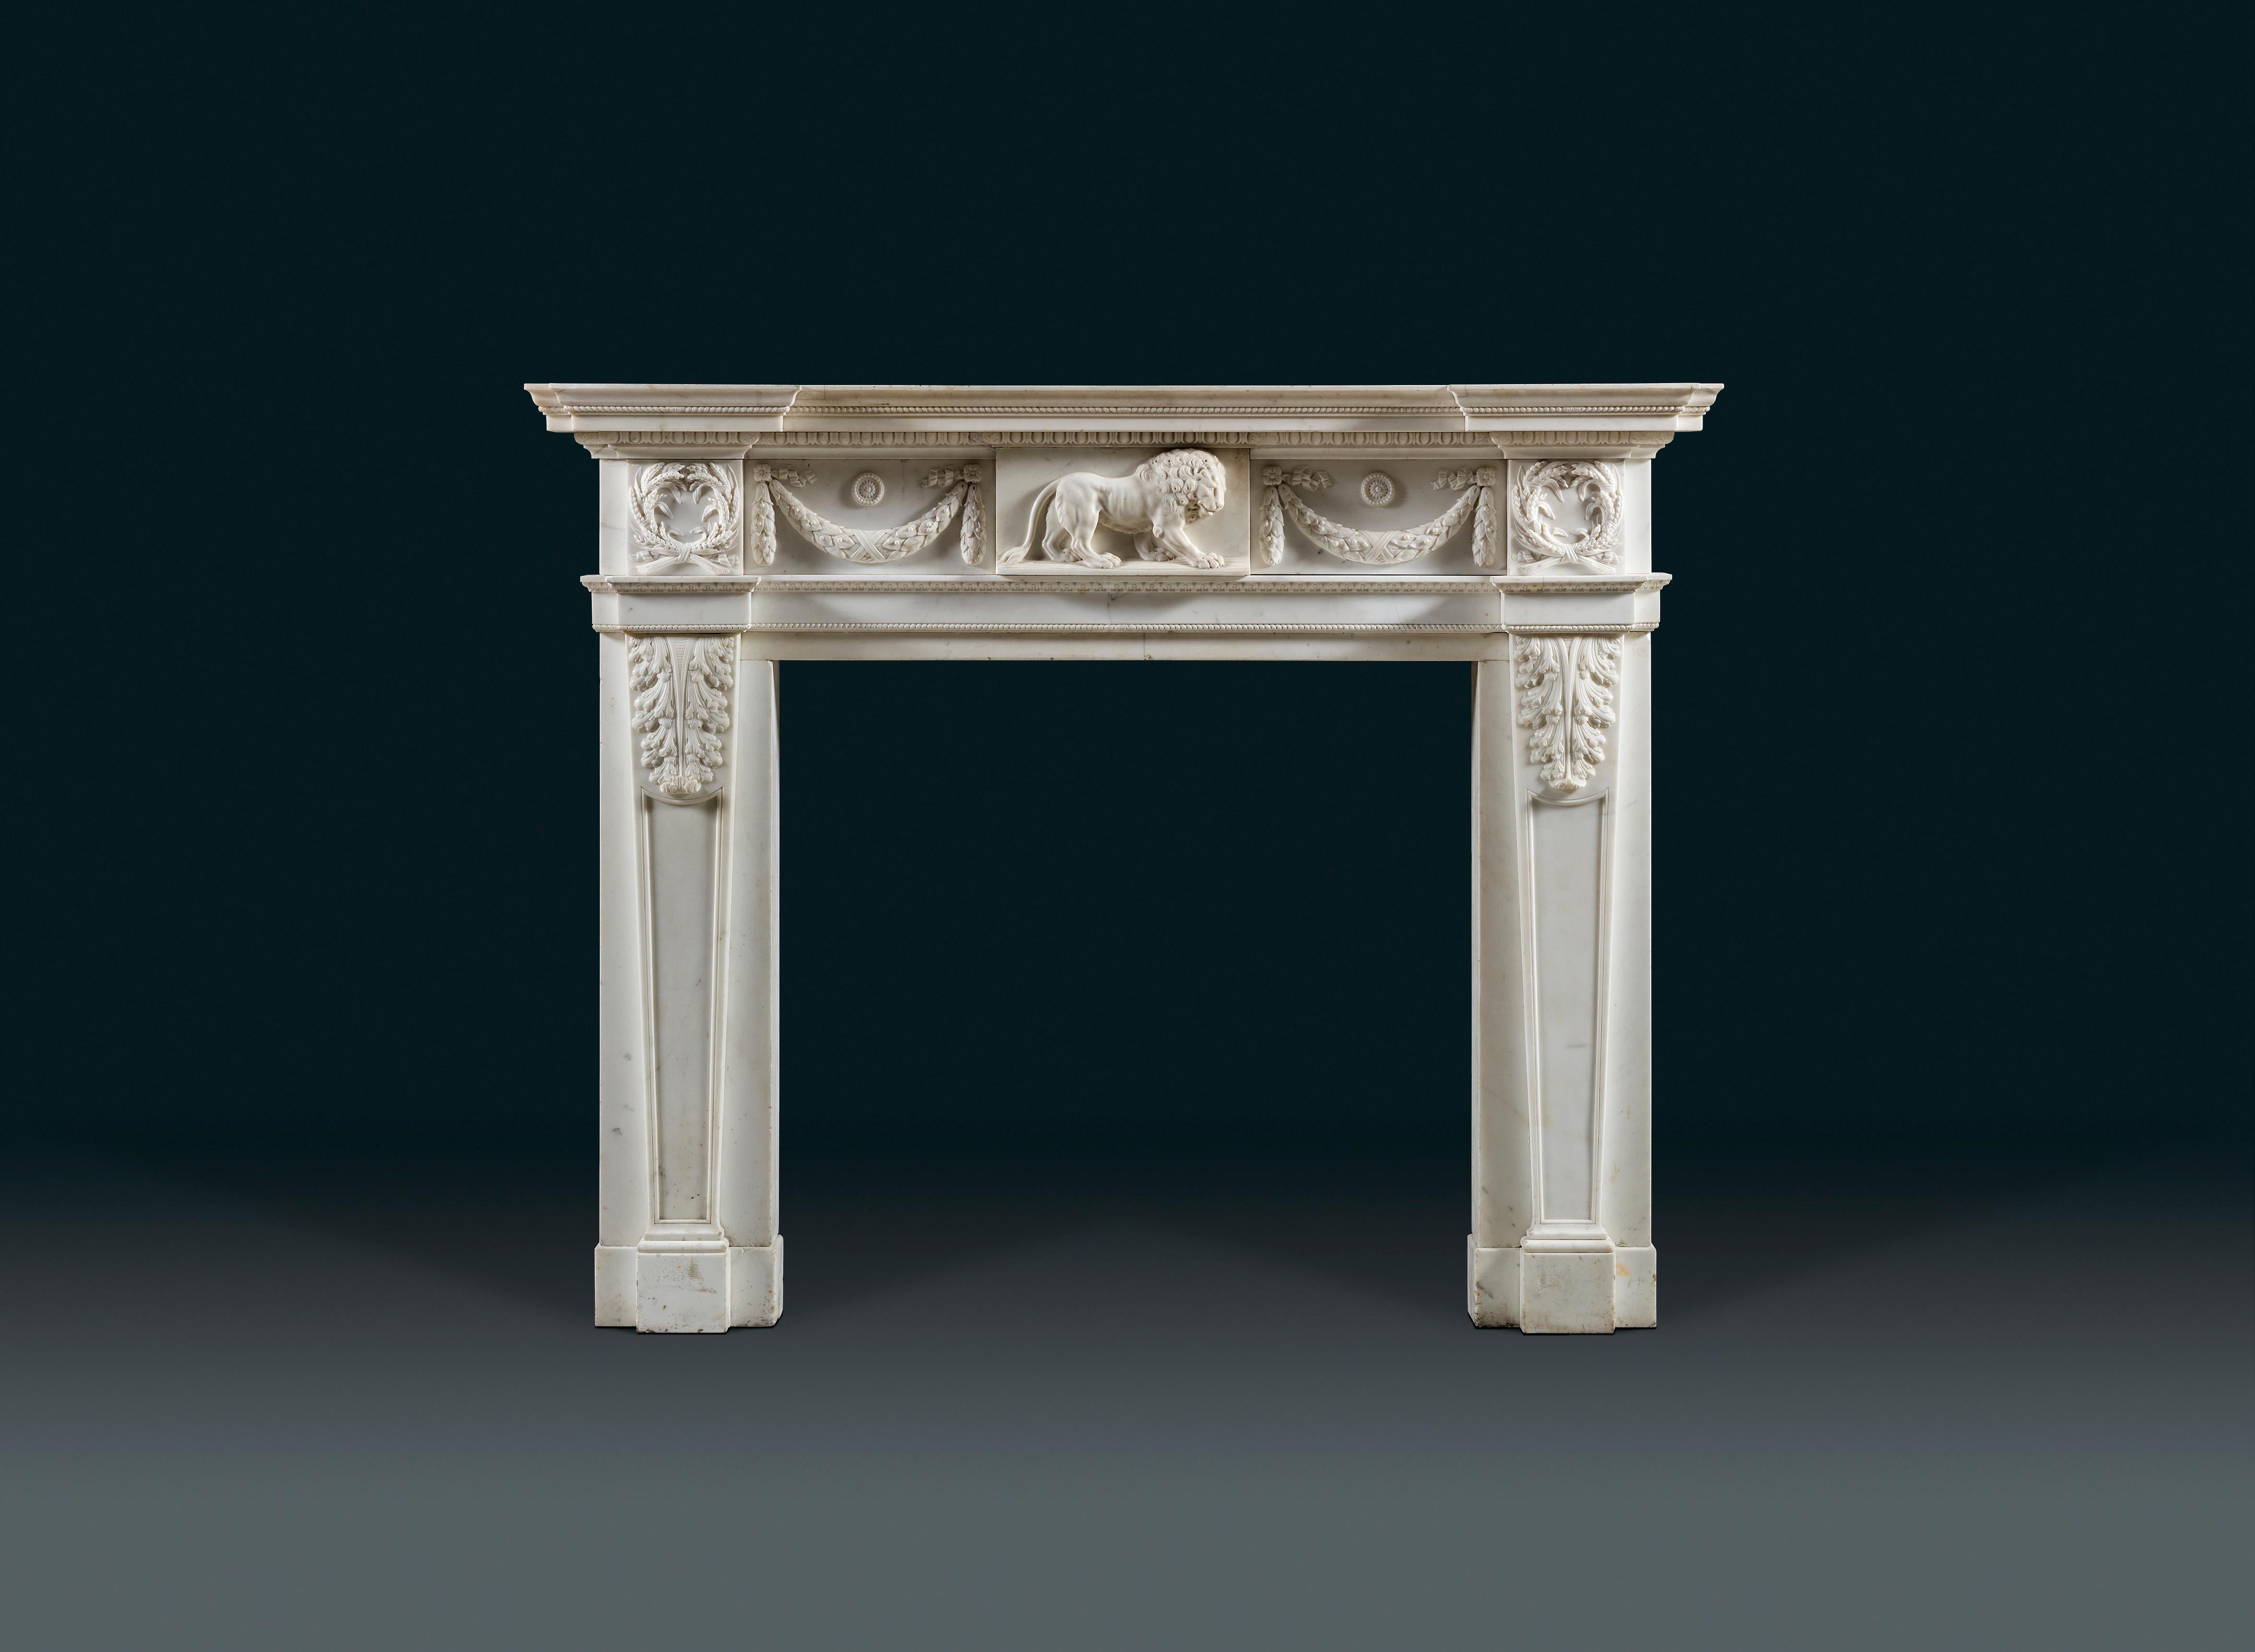 A magnificent statuary marble mid-18th century chimneypiece bearing an exquisitely carved lion on the central tablet. The lion is reminiscent of the Medici Lions guarding the Loggia Dei Lanzi in Florence, once the centre of the family’s artistic